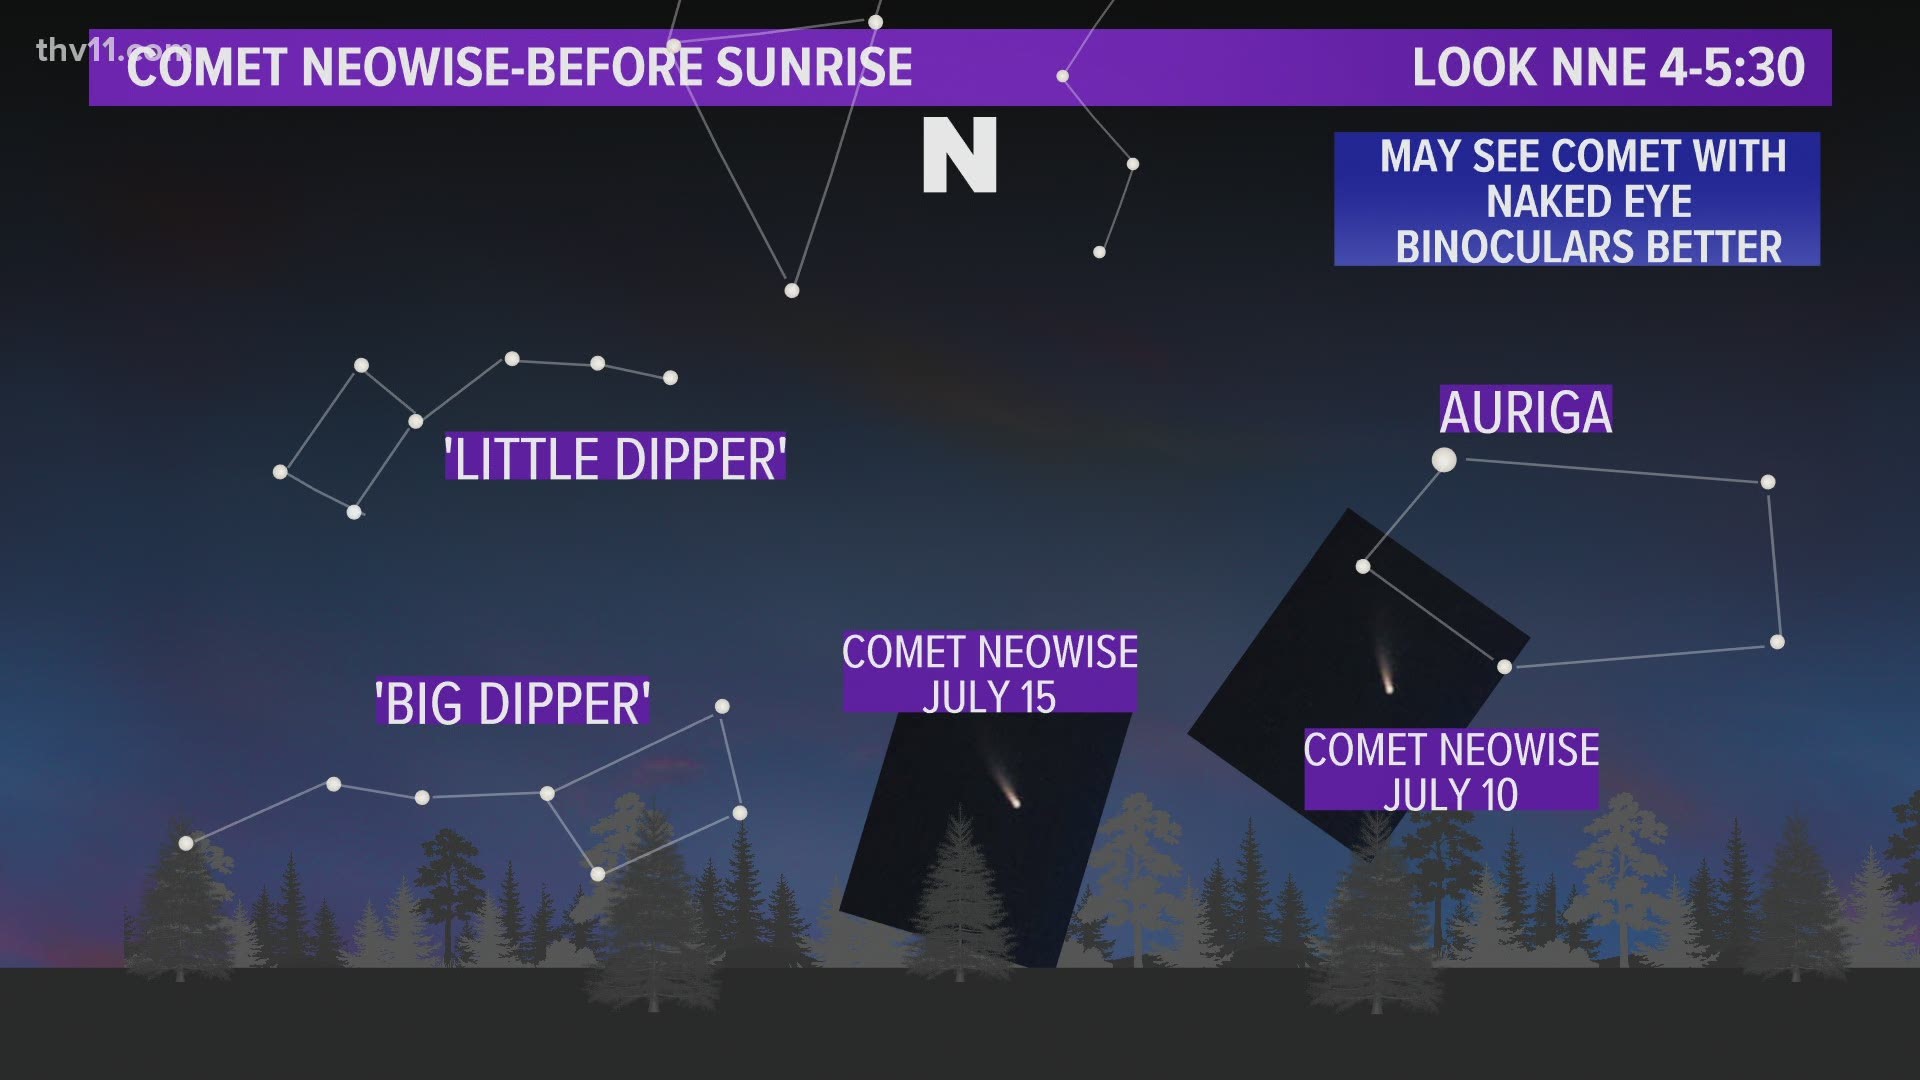 A comet could be seen by the naked eye before sunrise all during July if weather is clear.